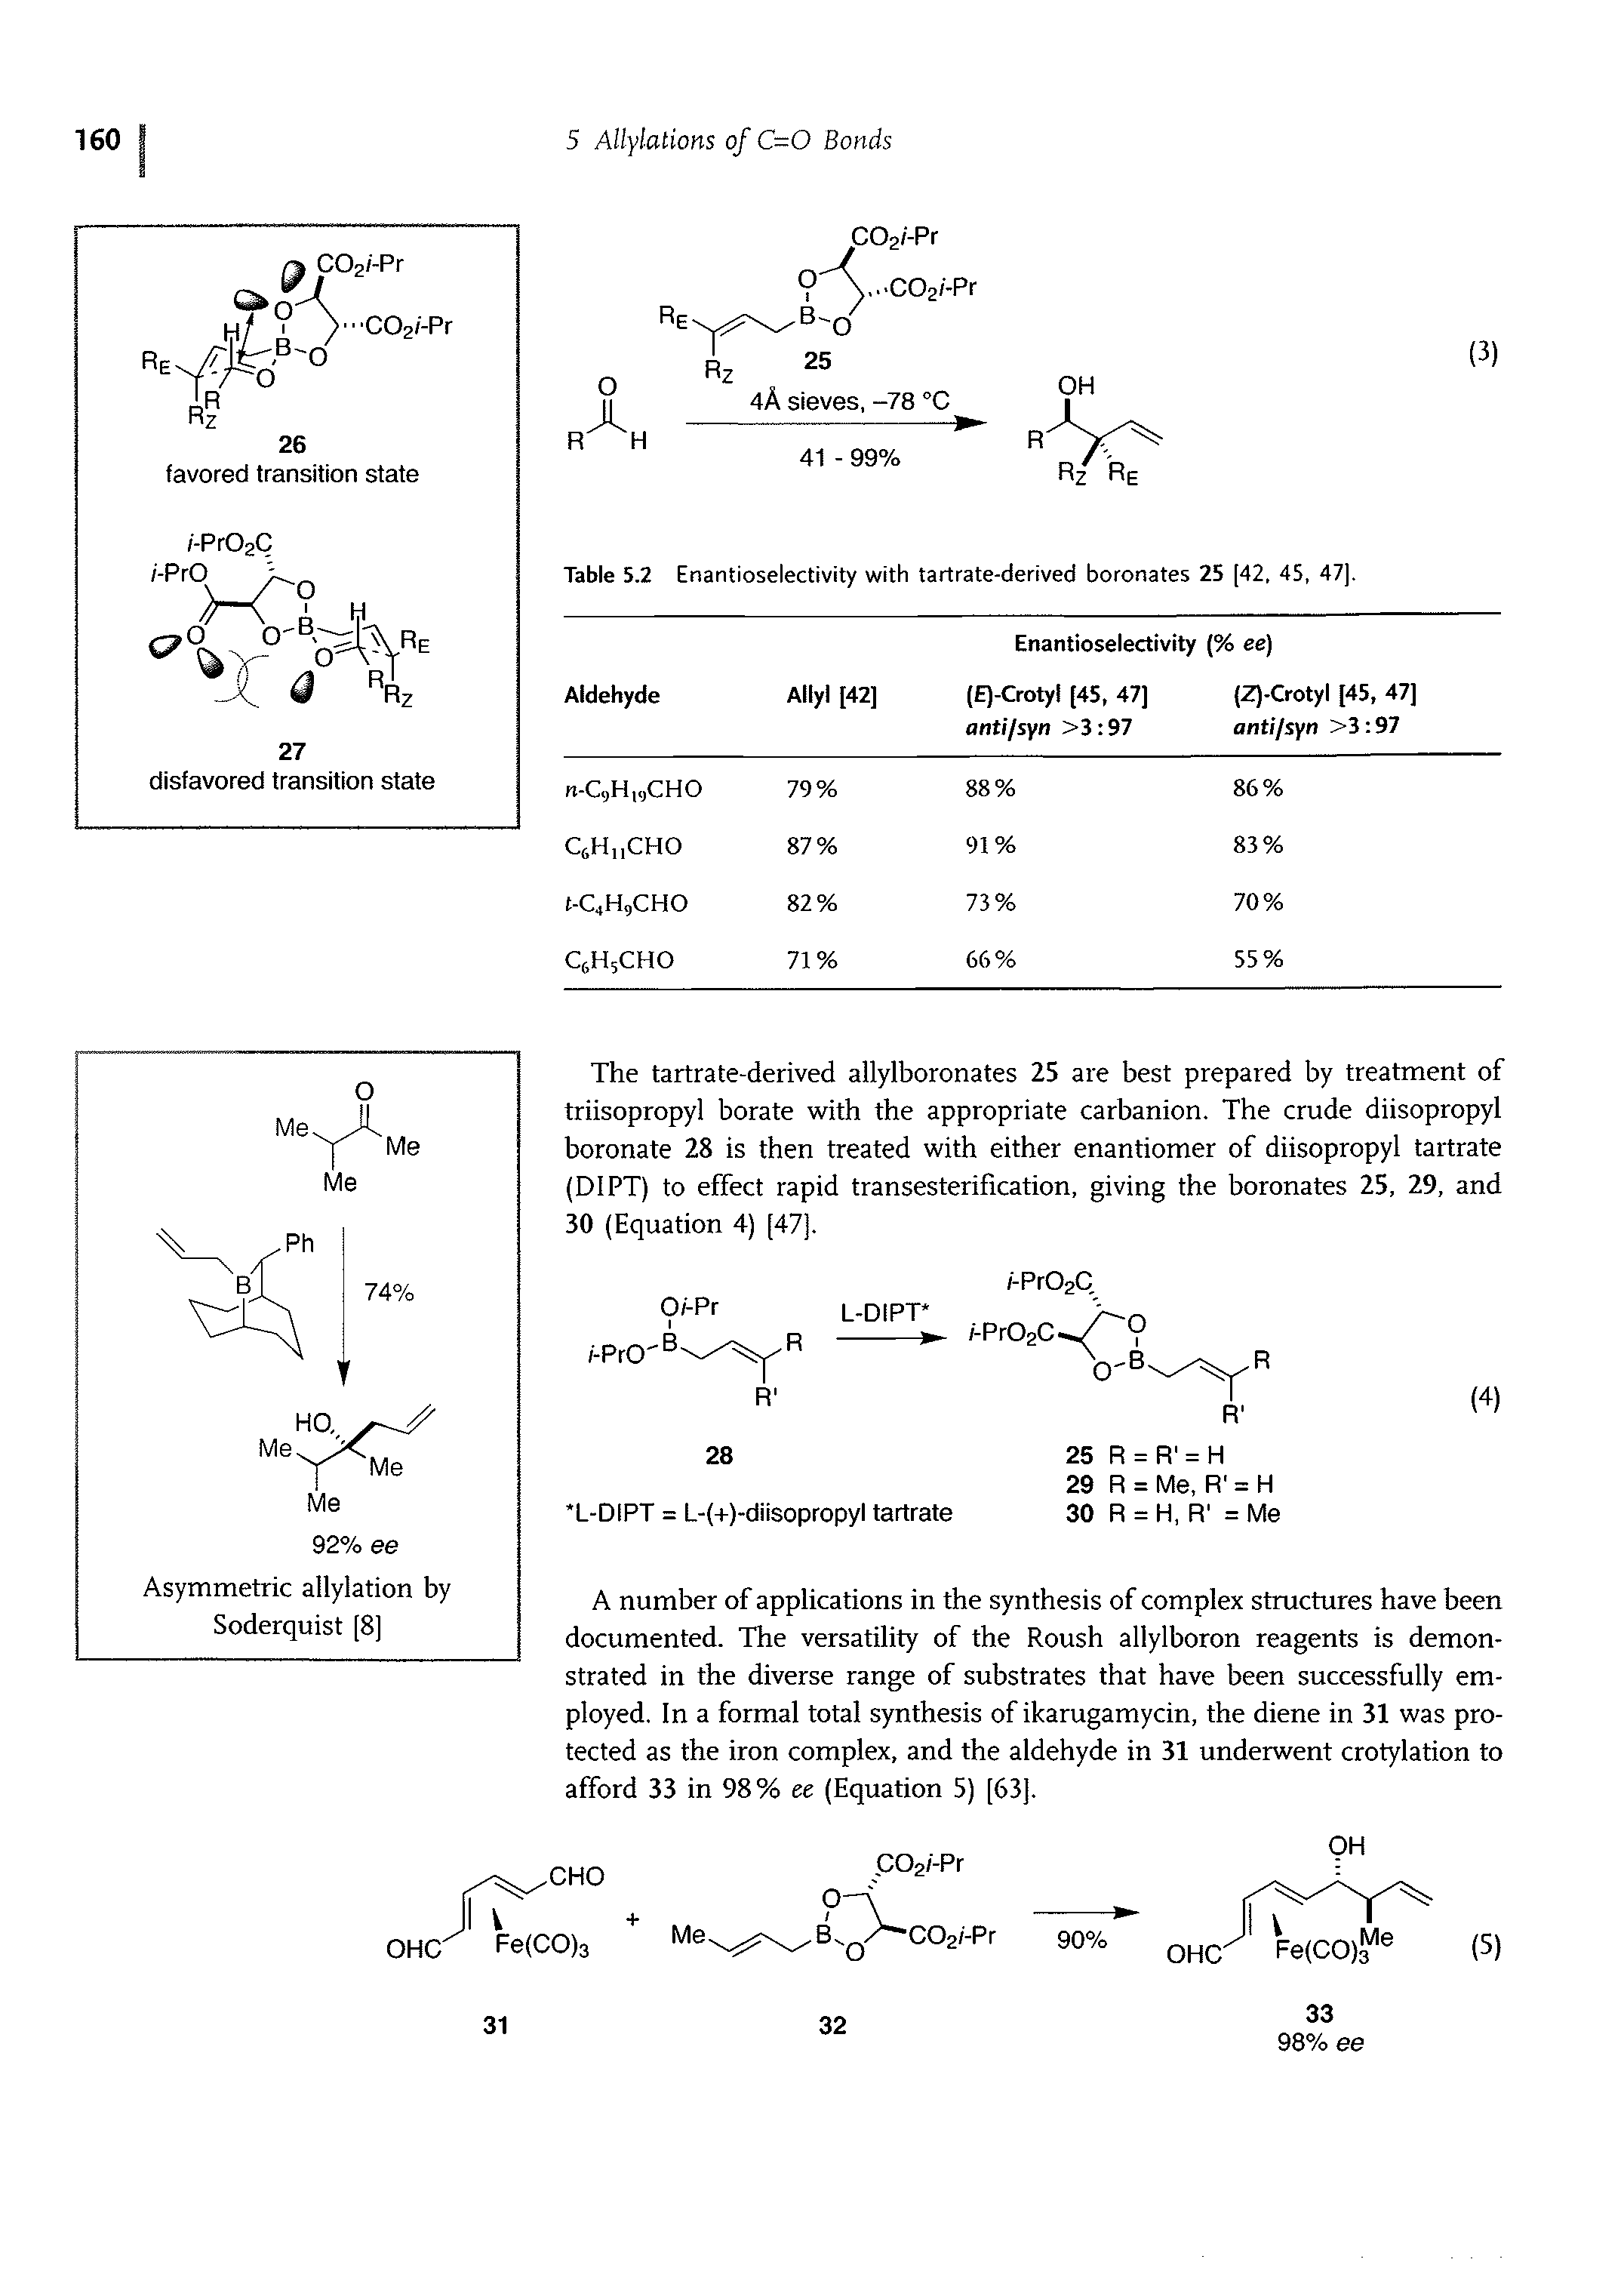 Table 5.2 Enantioselectivity with tartrate-derived boronates 25 [42. 45, 47).